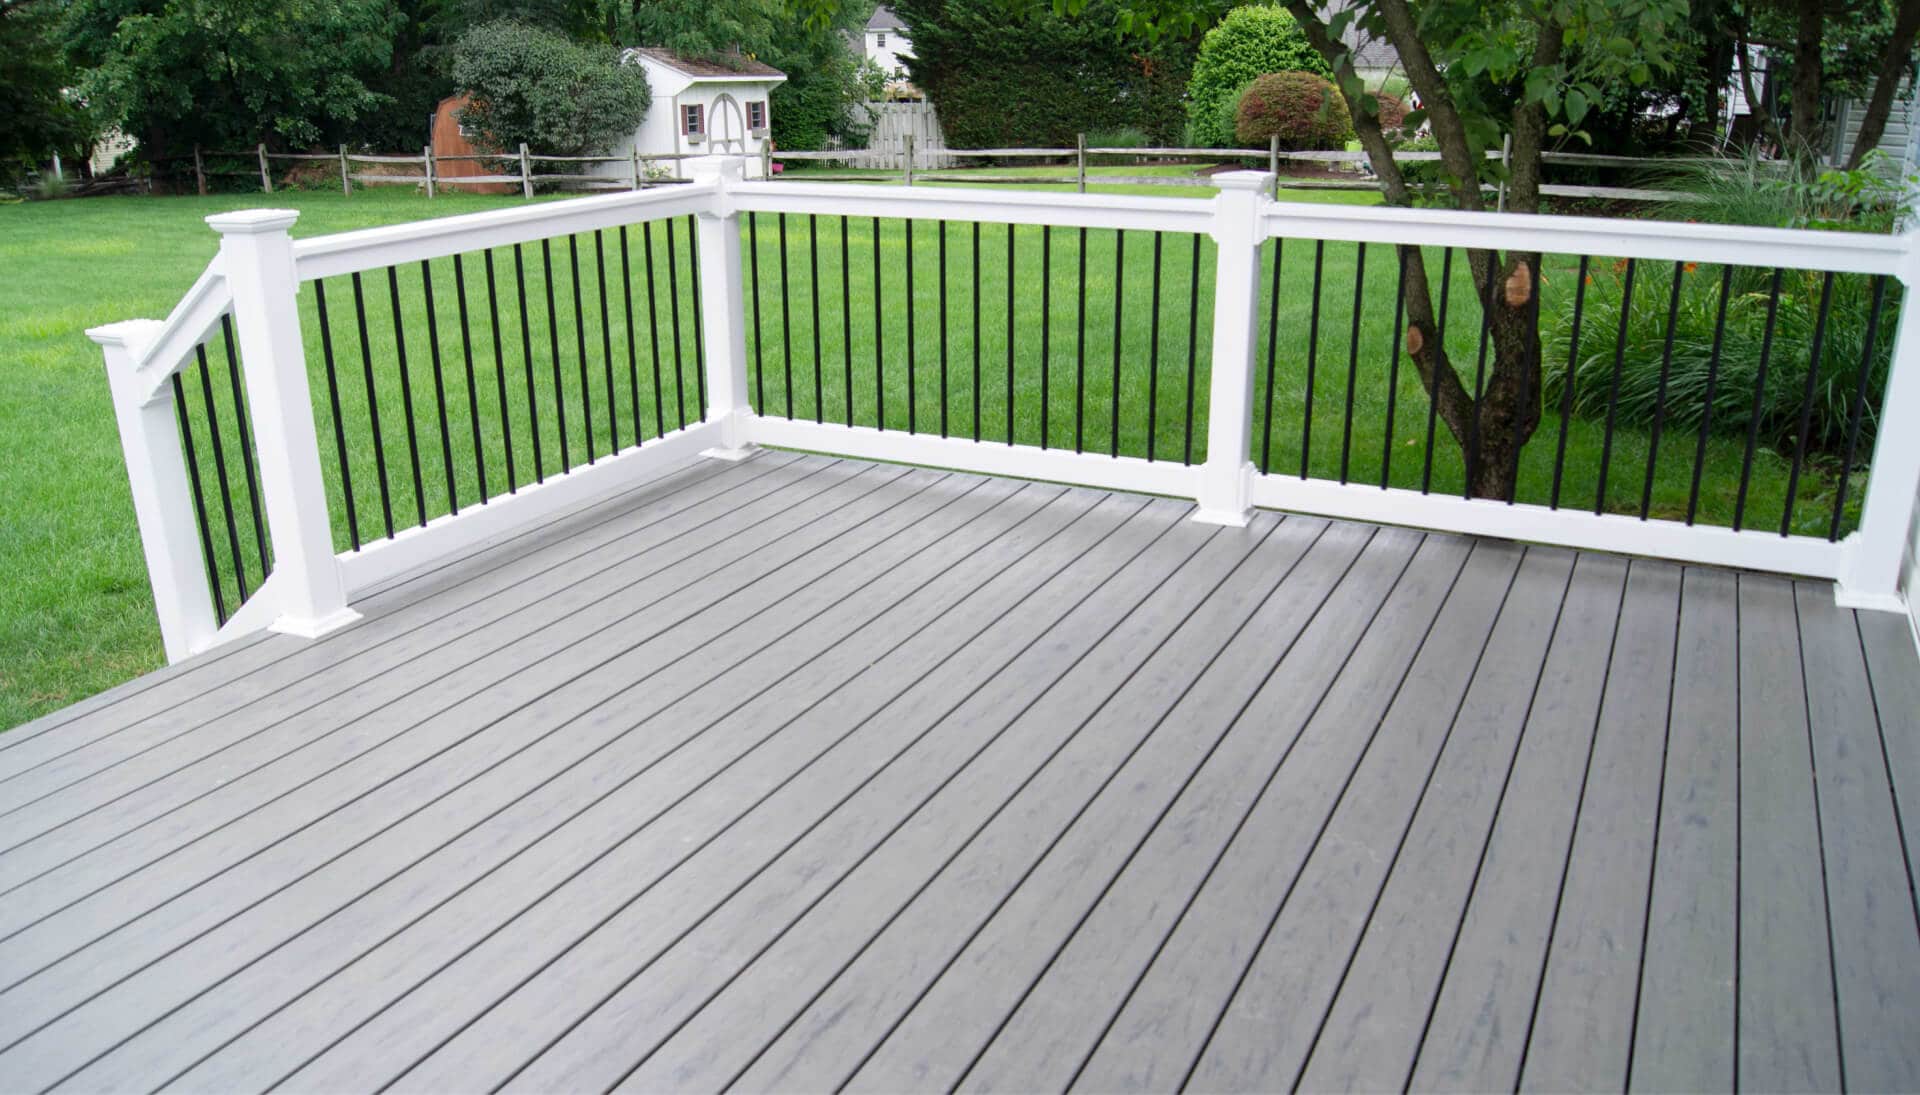 Specialists in deck railing and covers Vancouver, Washington